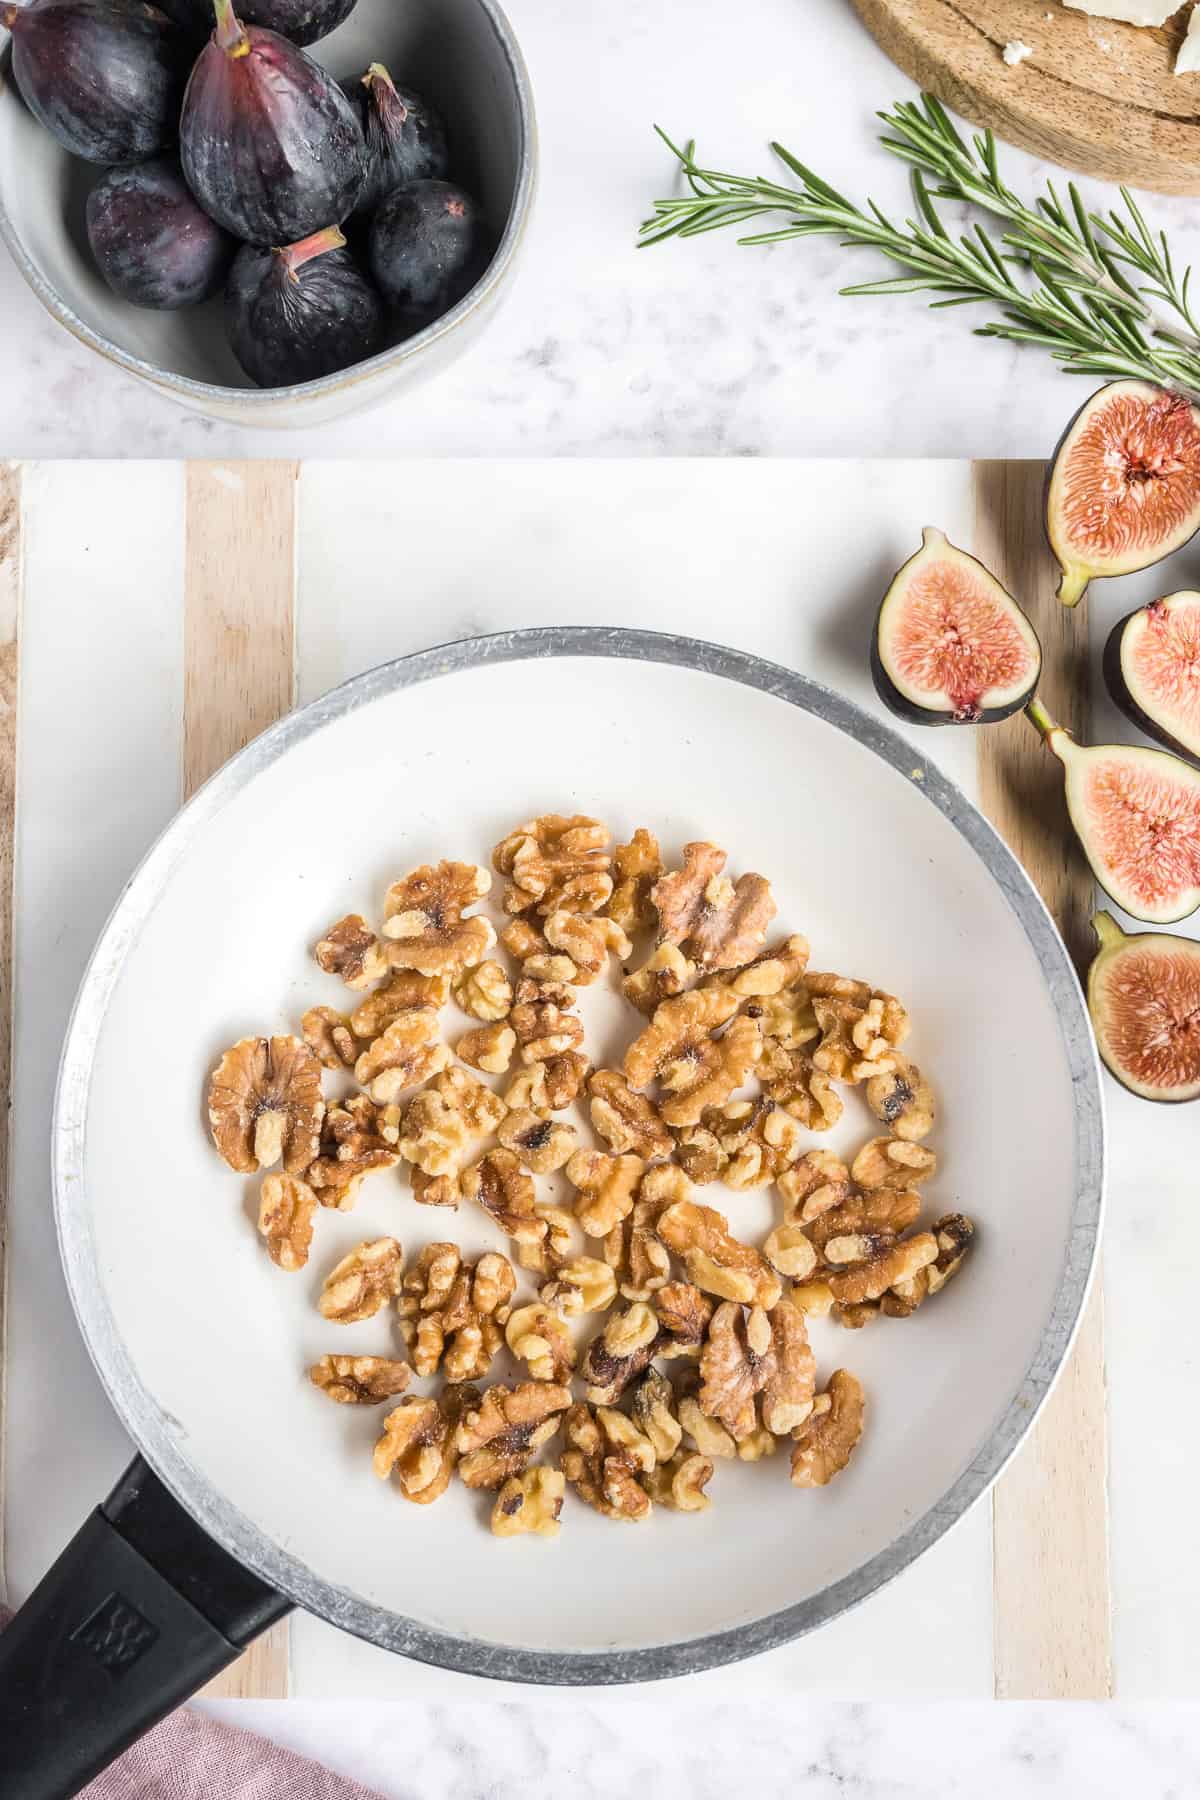 Toasted walnuts in a white skillet with whole and halved figs and rosemary around it.